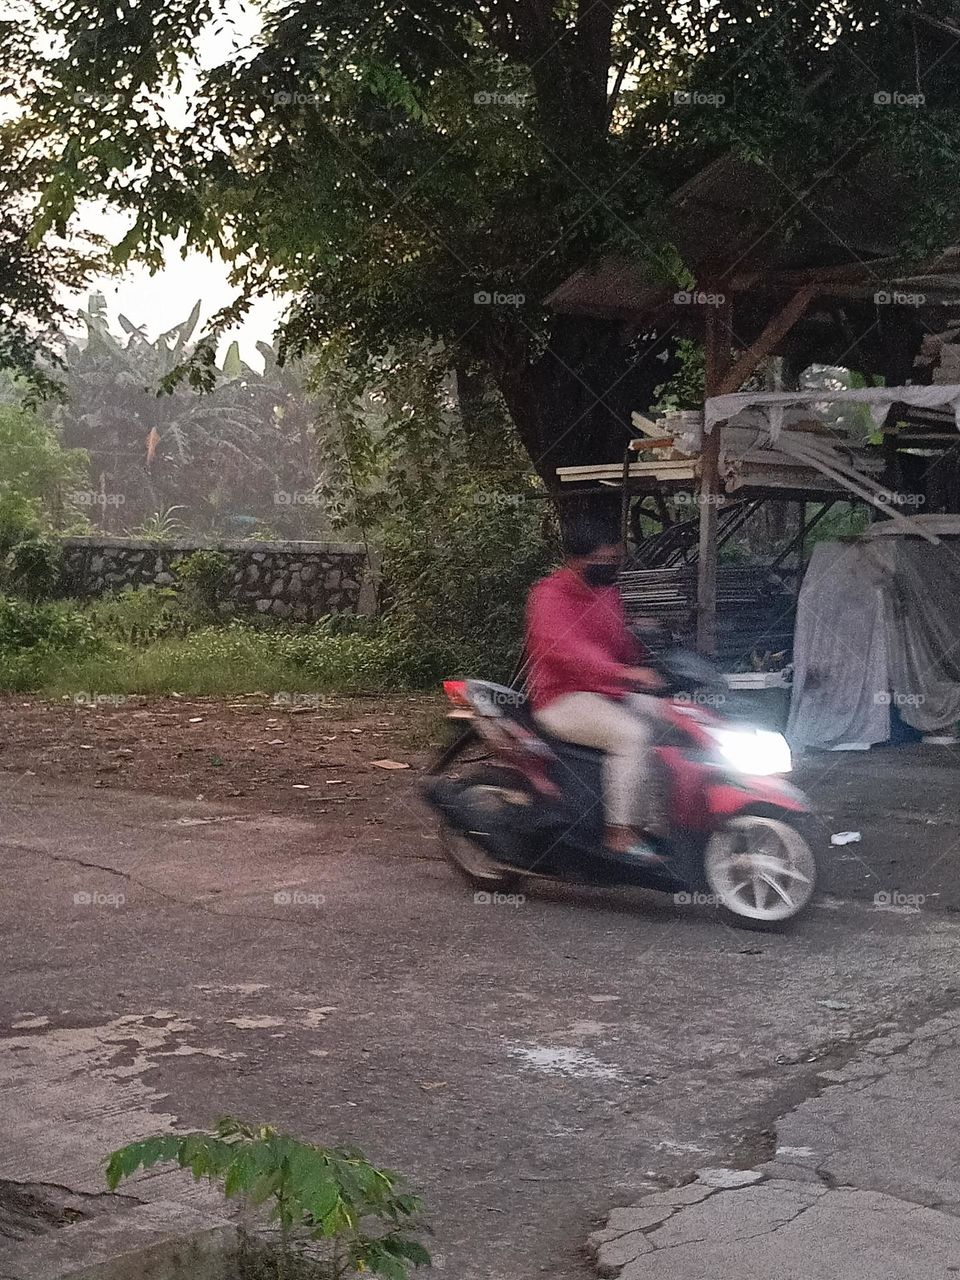 The Man Riding The Motor